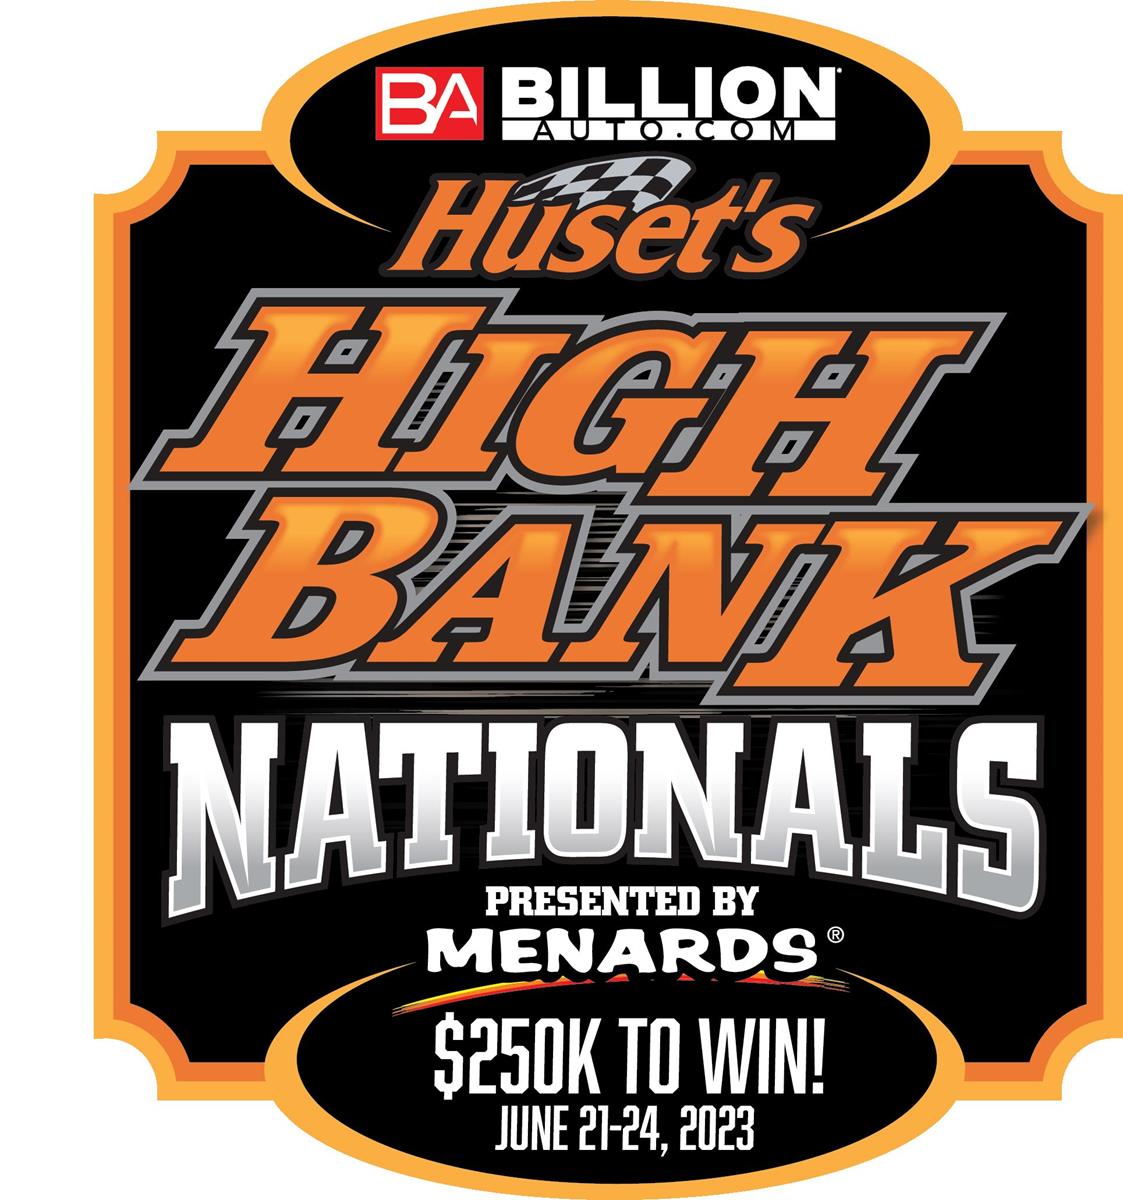 Huset’s Speedway Adds BillionAuto.com and MENARDS as Marketing Partners for Famed $250,000-to-Win Huset’s High Bank Nationals